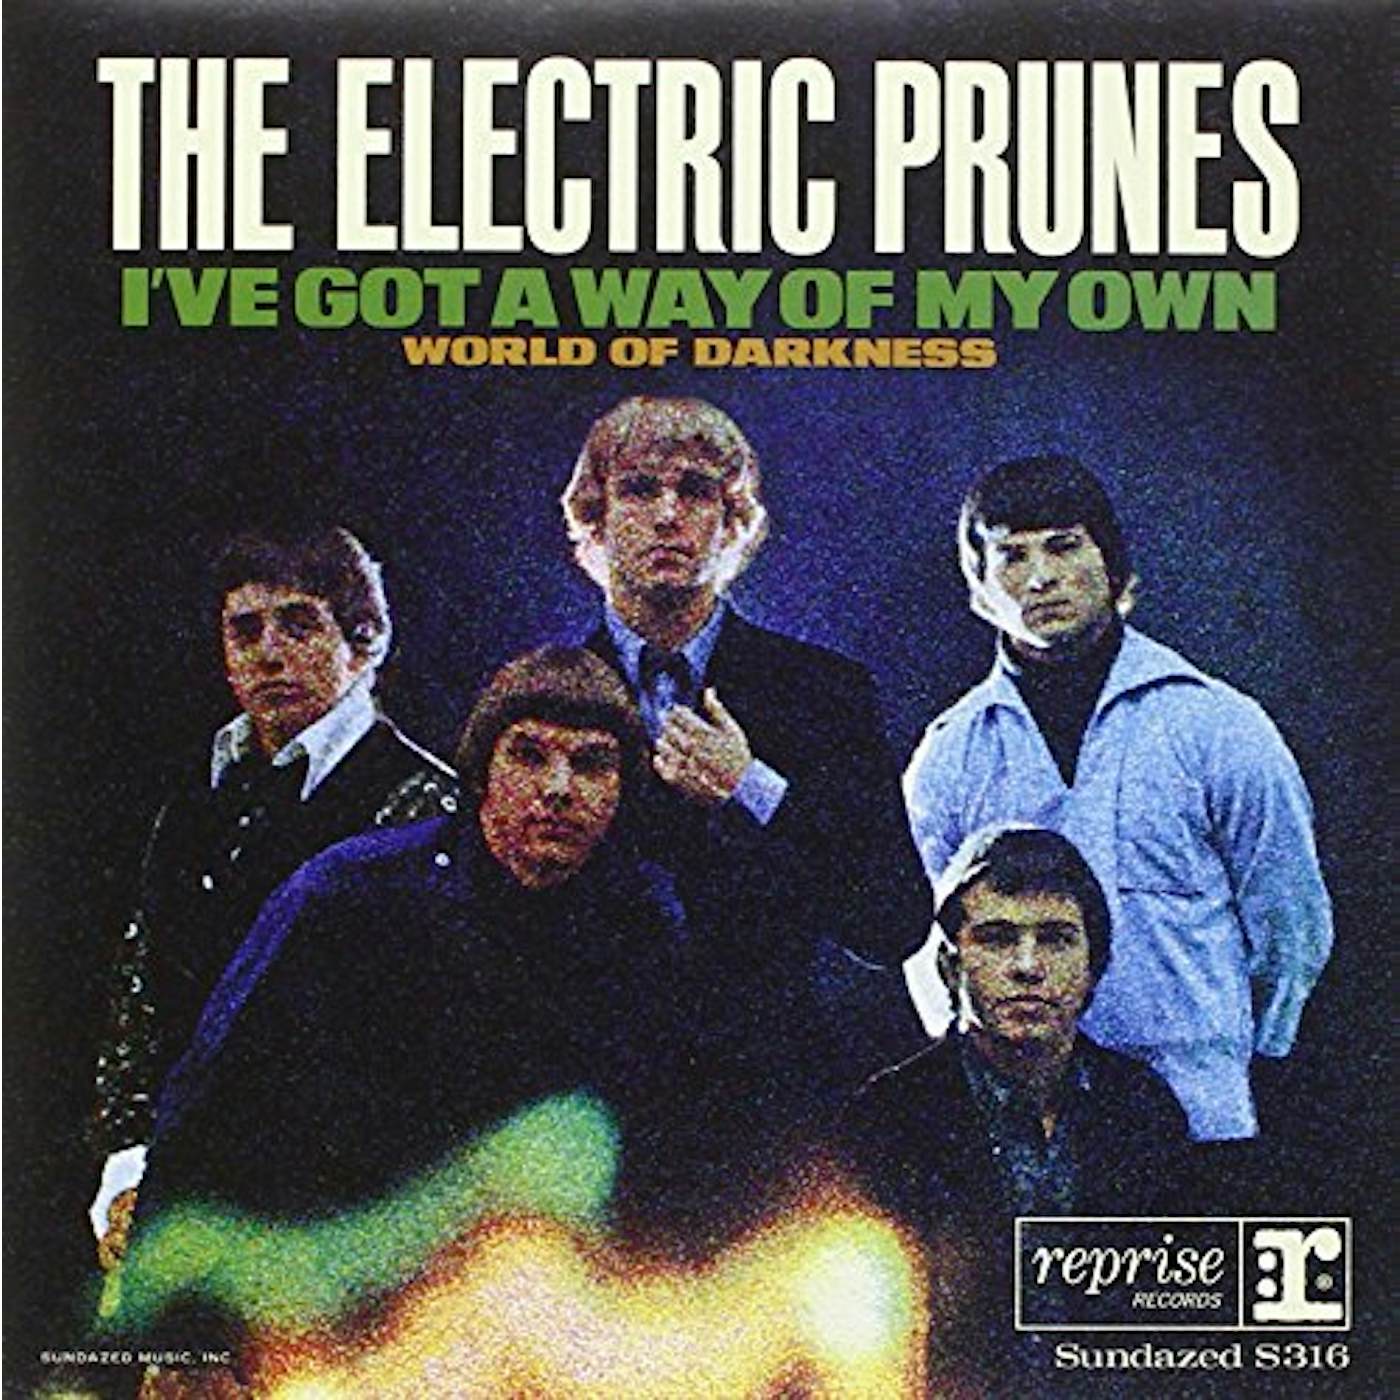 The Electric Prunes I'VE GOT A WAY / WORLD OF DARKNESS Vinyl Record